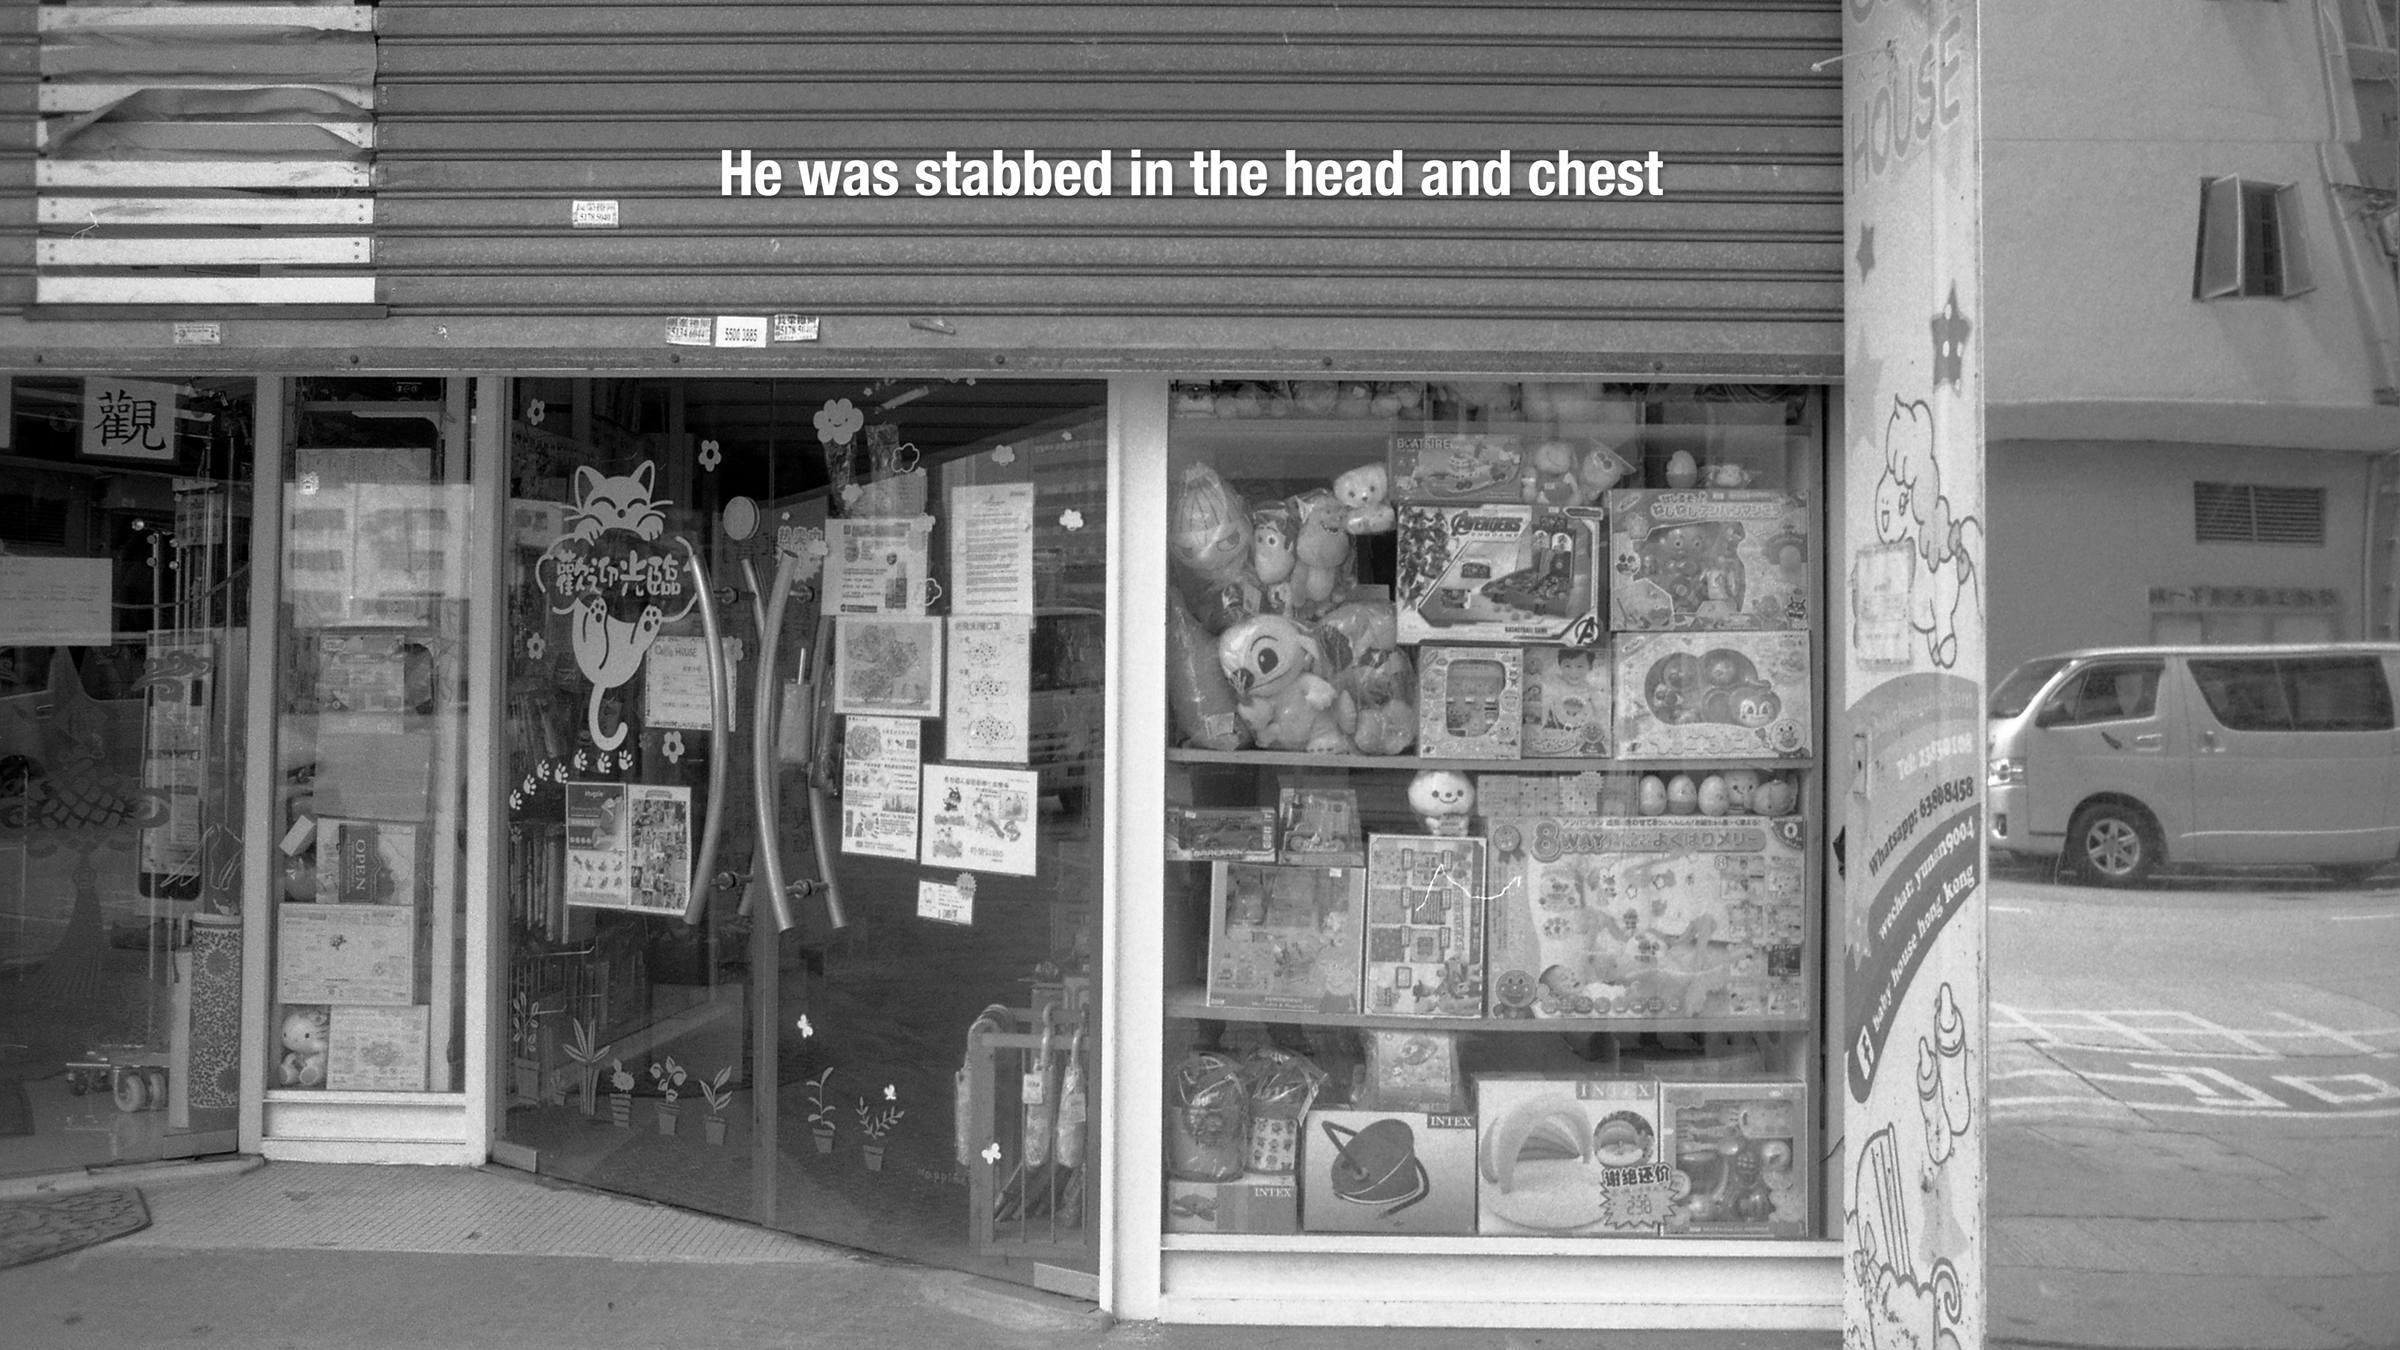 Black and white image of a shop front containing lots of toys. At the top, the words 'He was stabbed in the head and chest' are superimposed.